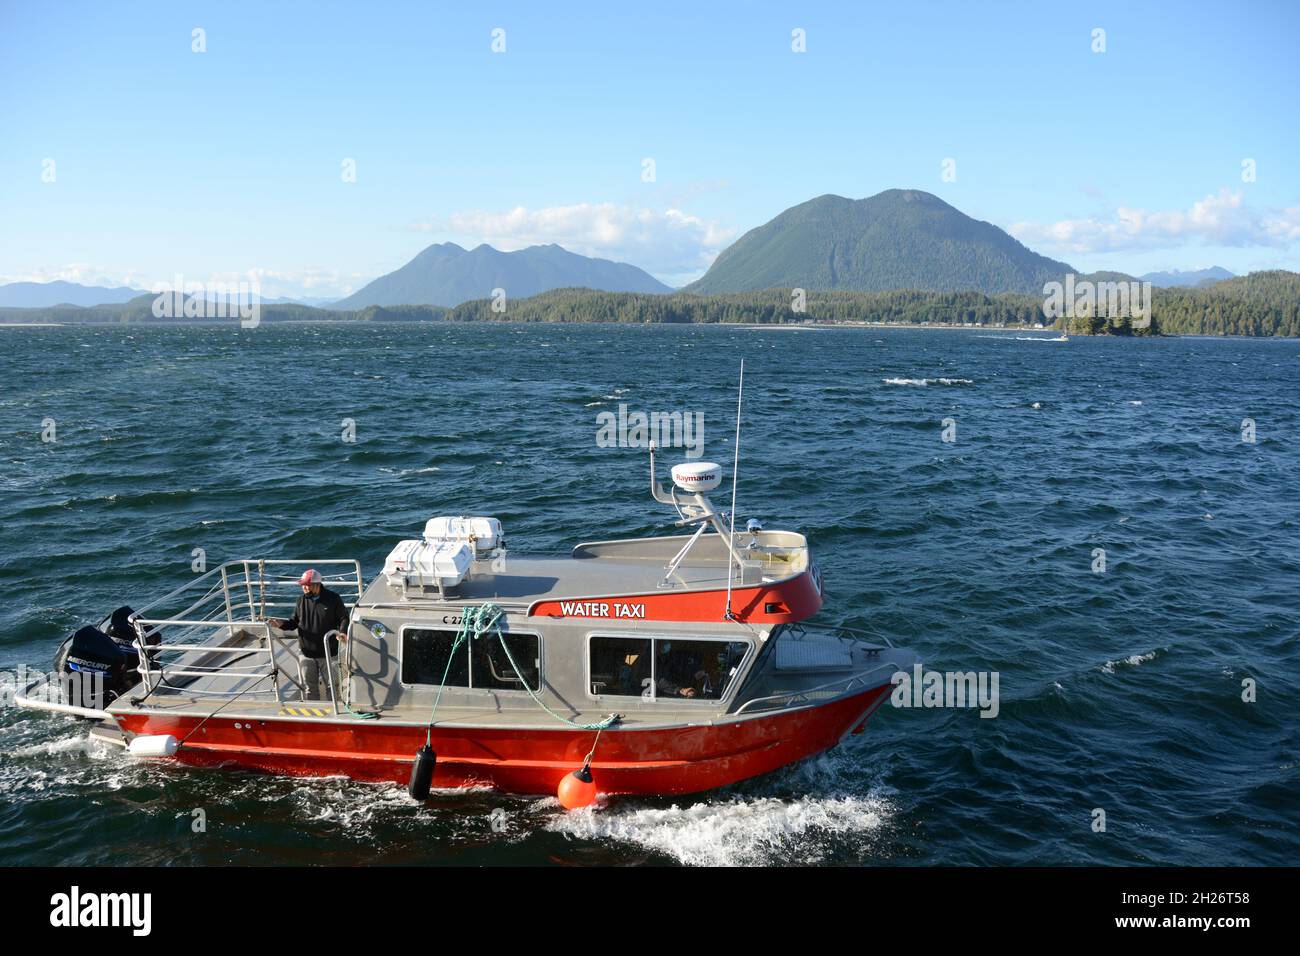 A water taxi off The Nuu-chah-nulth First Nation village of Opitsaht, in Clayoquot Sound, near Tofino, Vancouver Island, British Columbia, Canada. Stock Photo